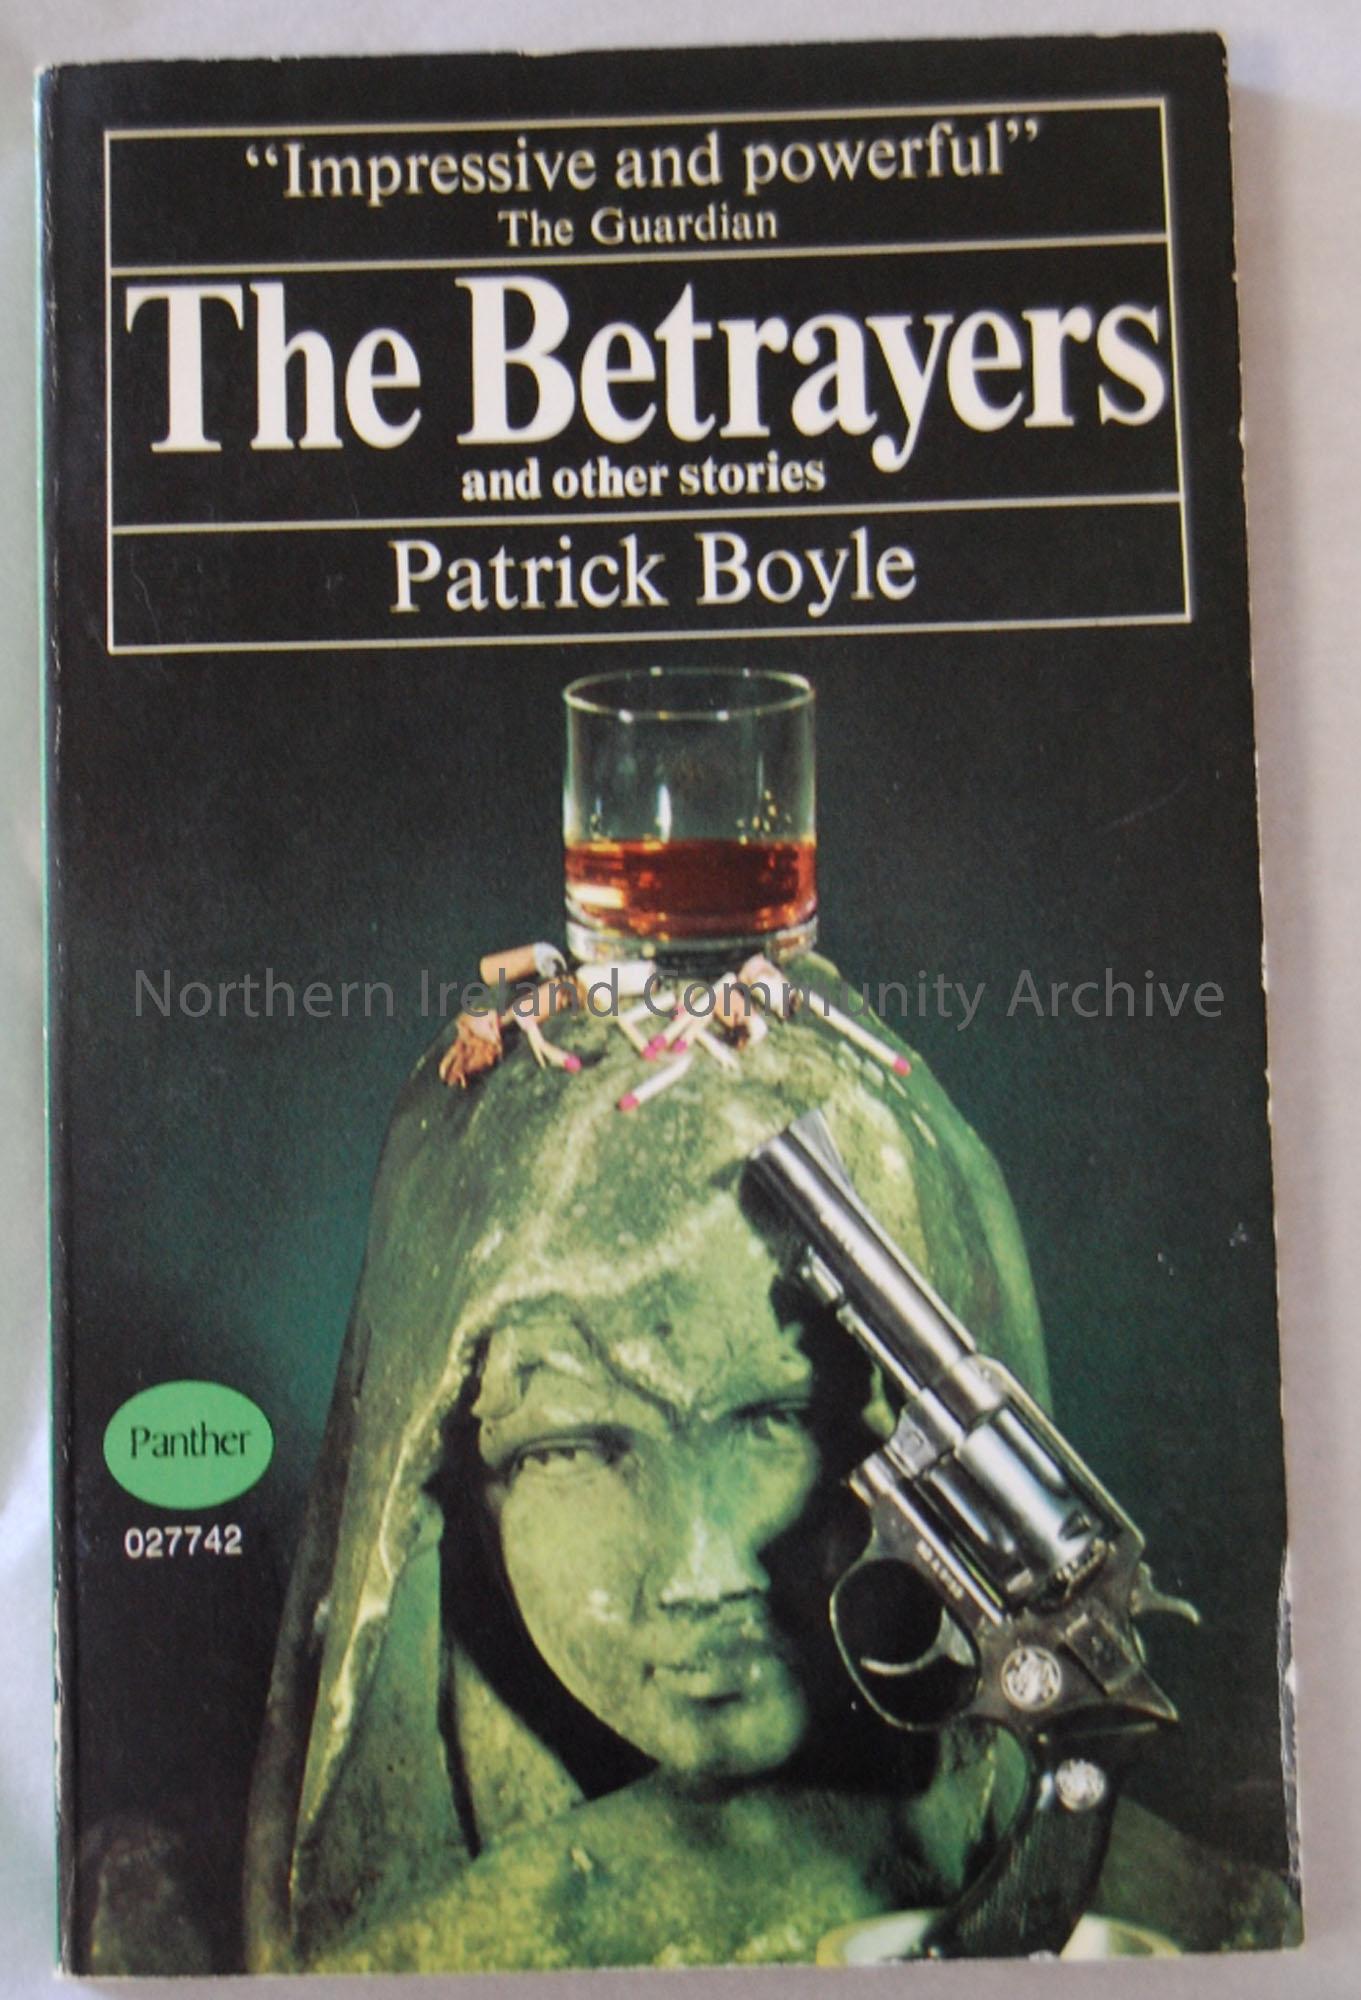 Patrick Boyle novel- The Betrayers and other stories